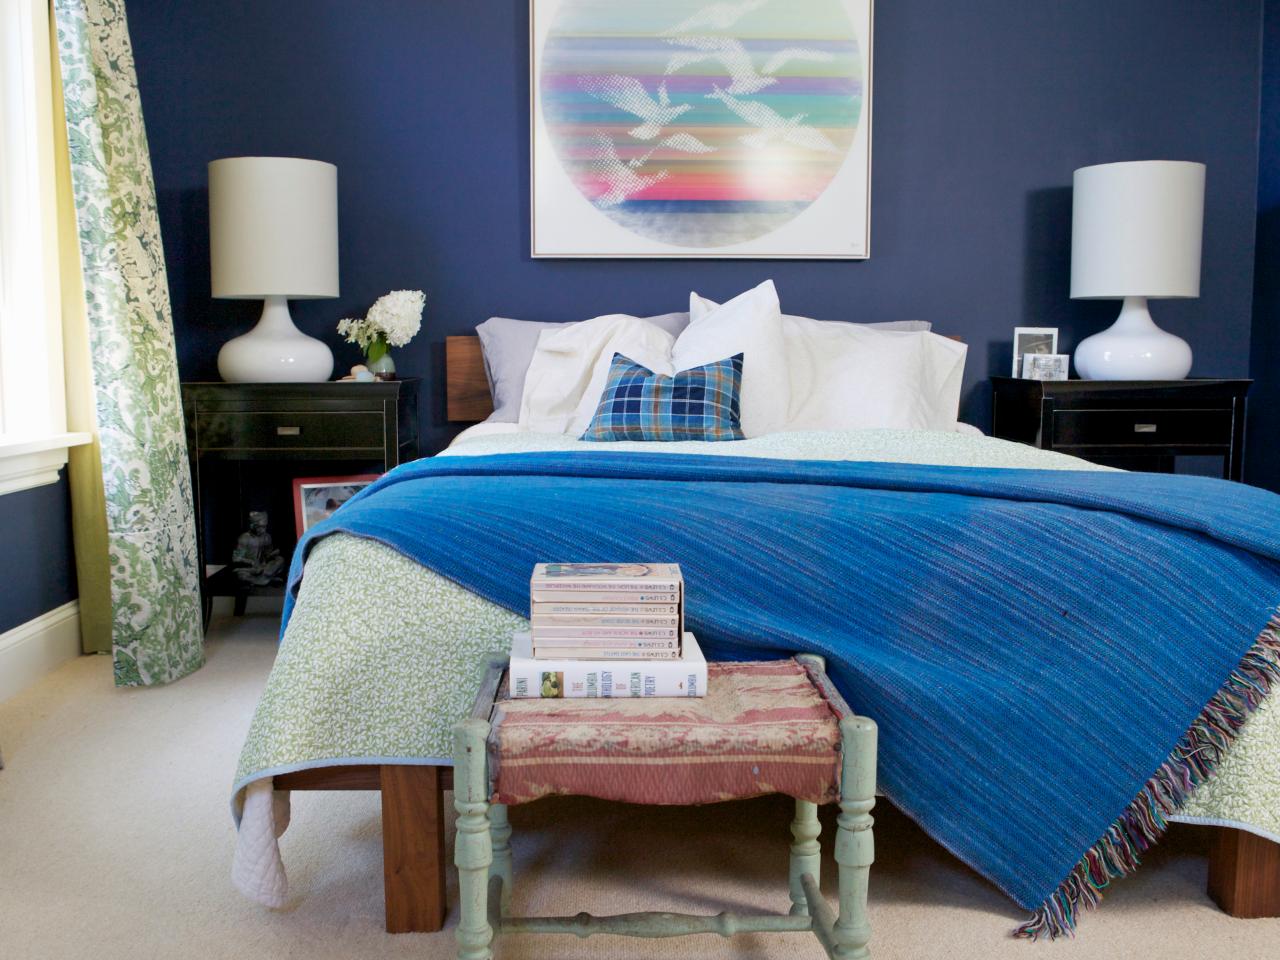 10 Design Tips for Your Bedroom Décor